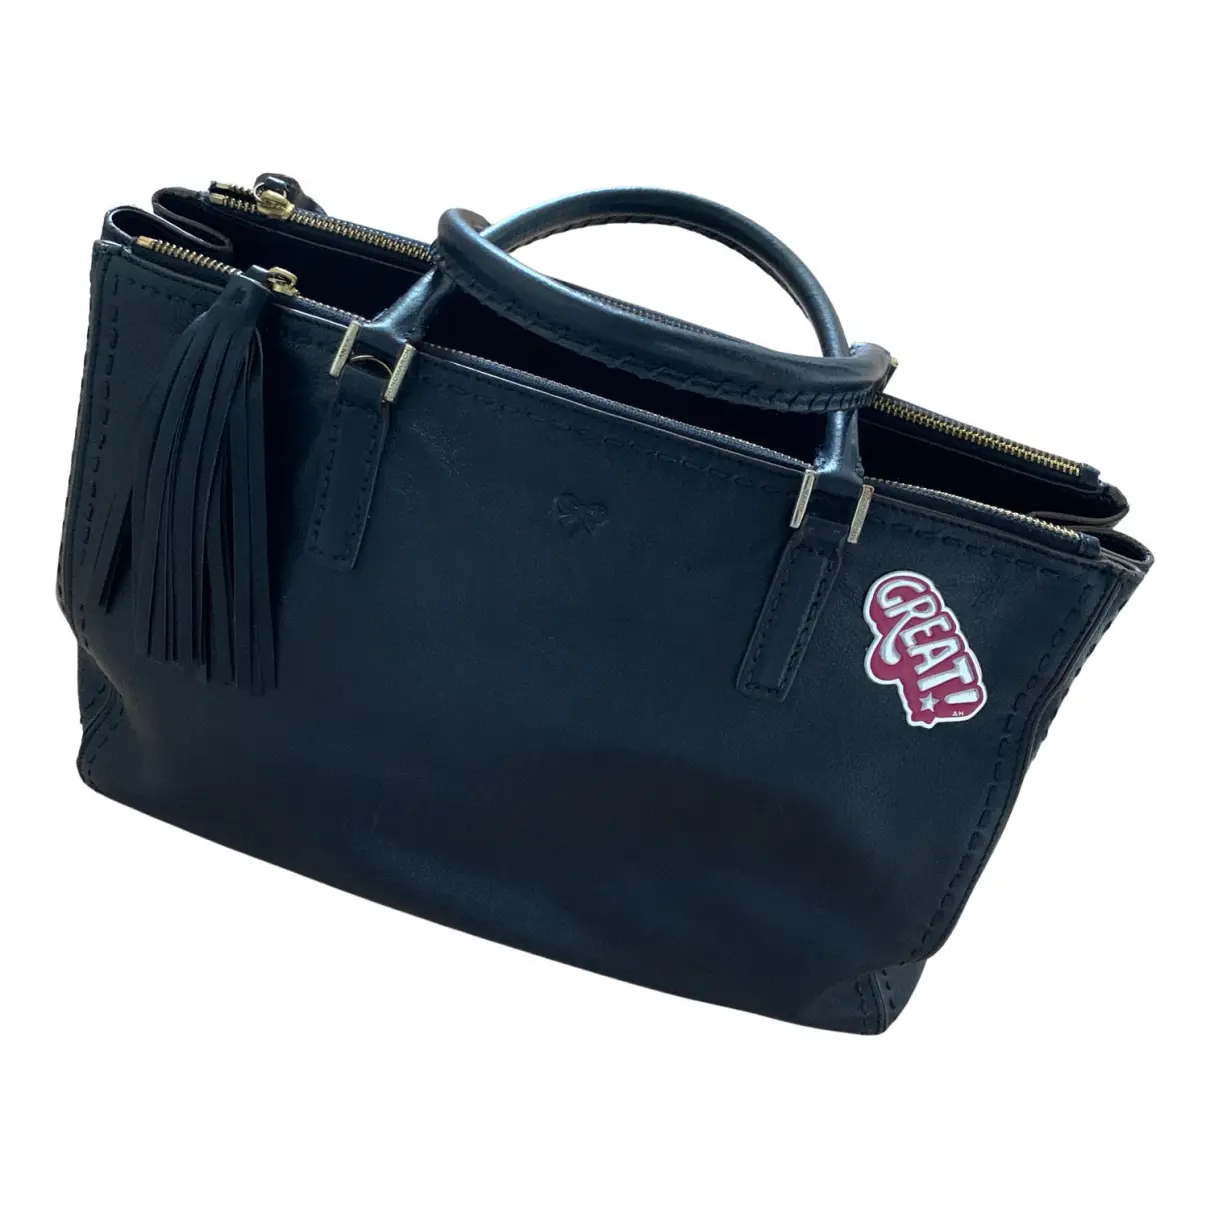 Pimlico leather tote Anya Hindmarch